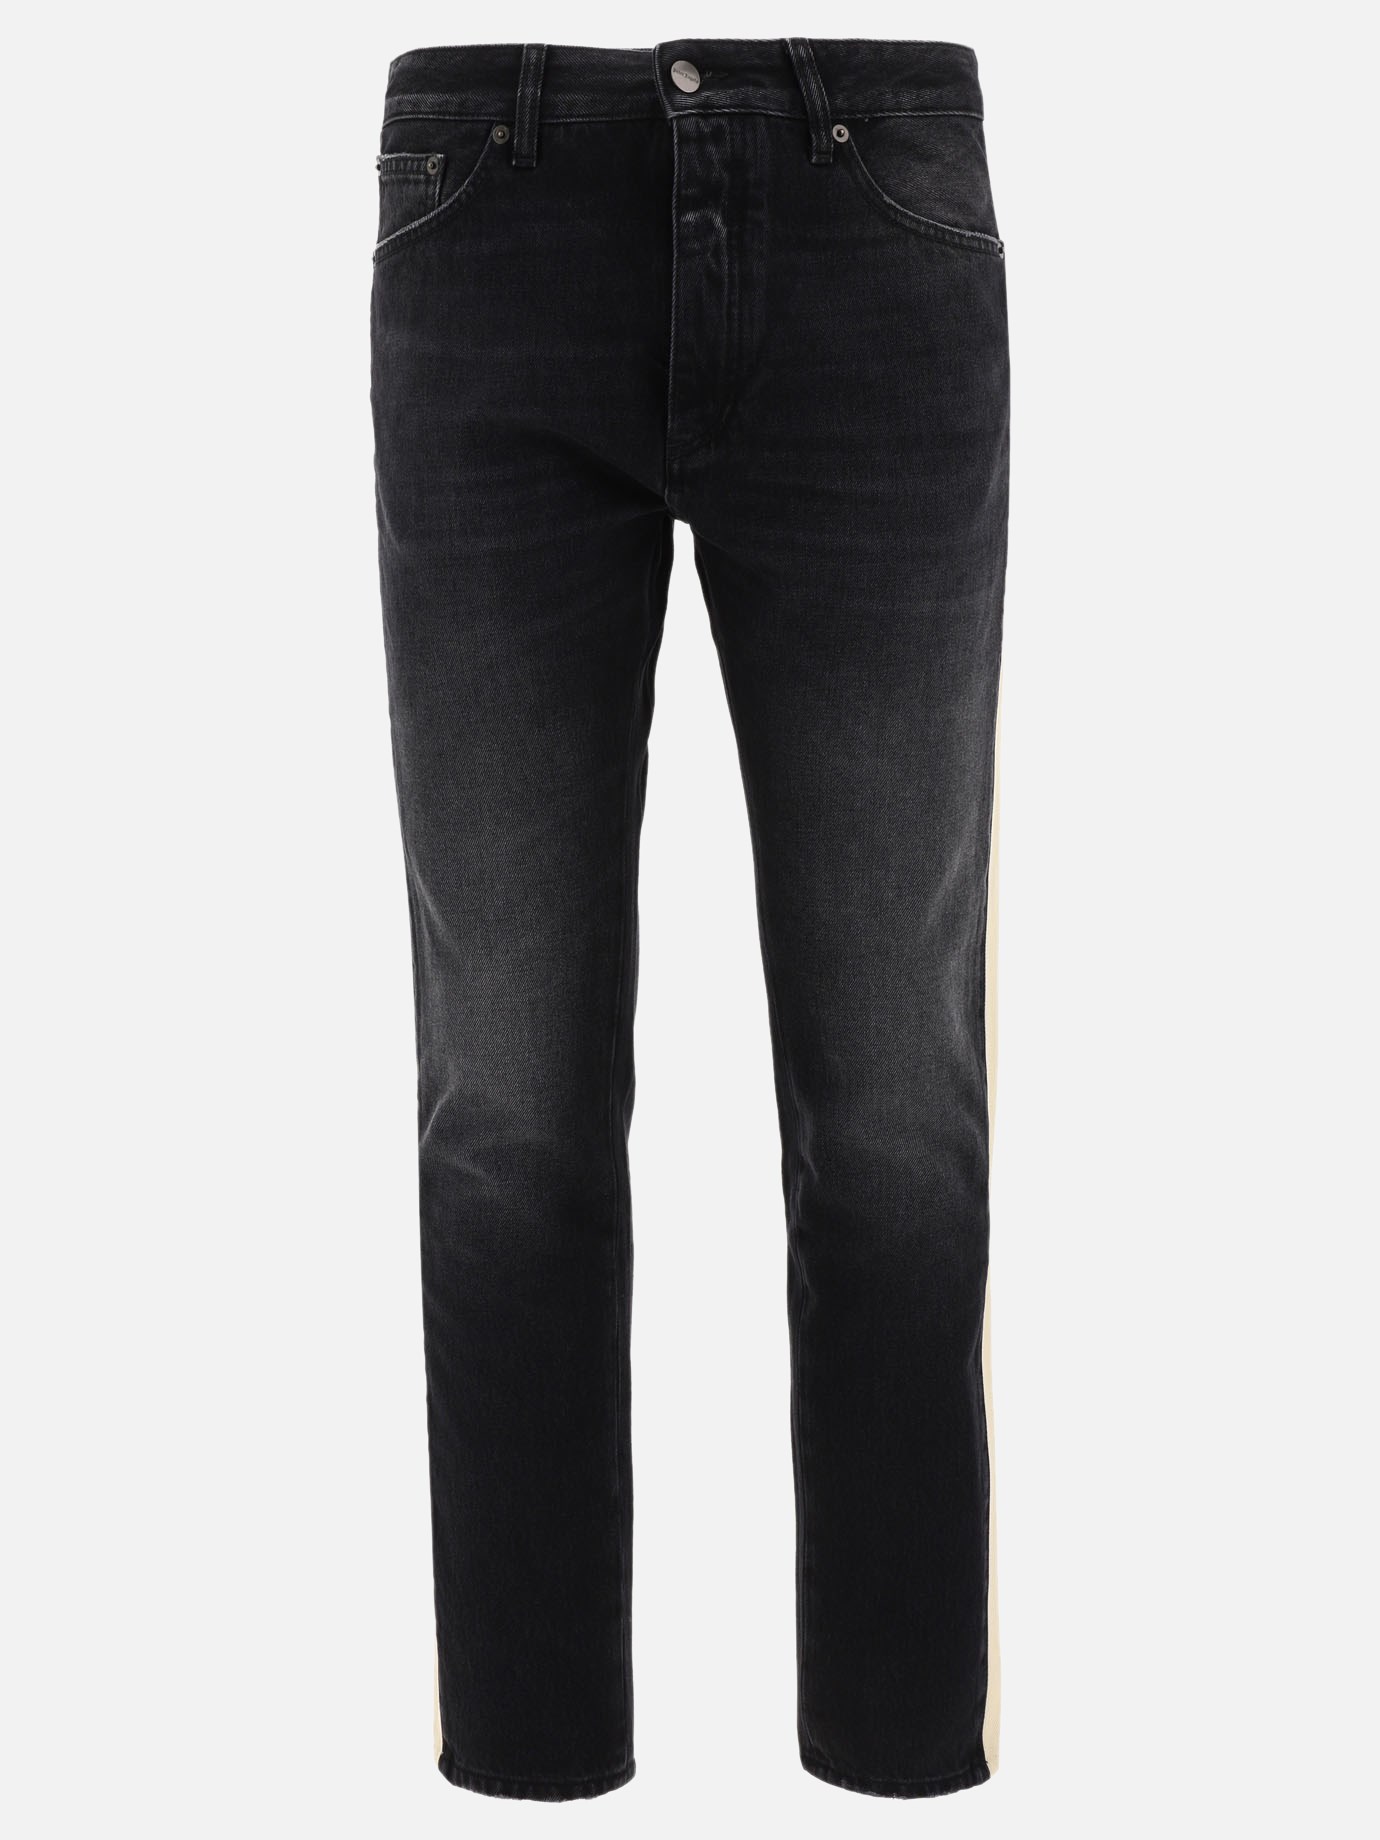 Side band jeans